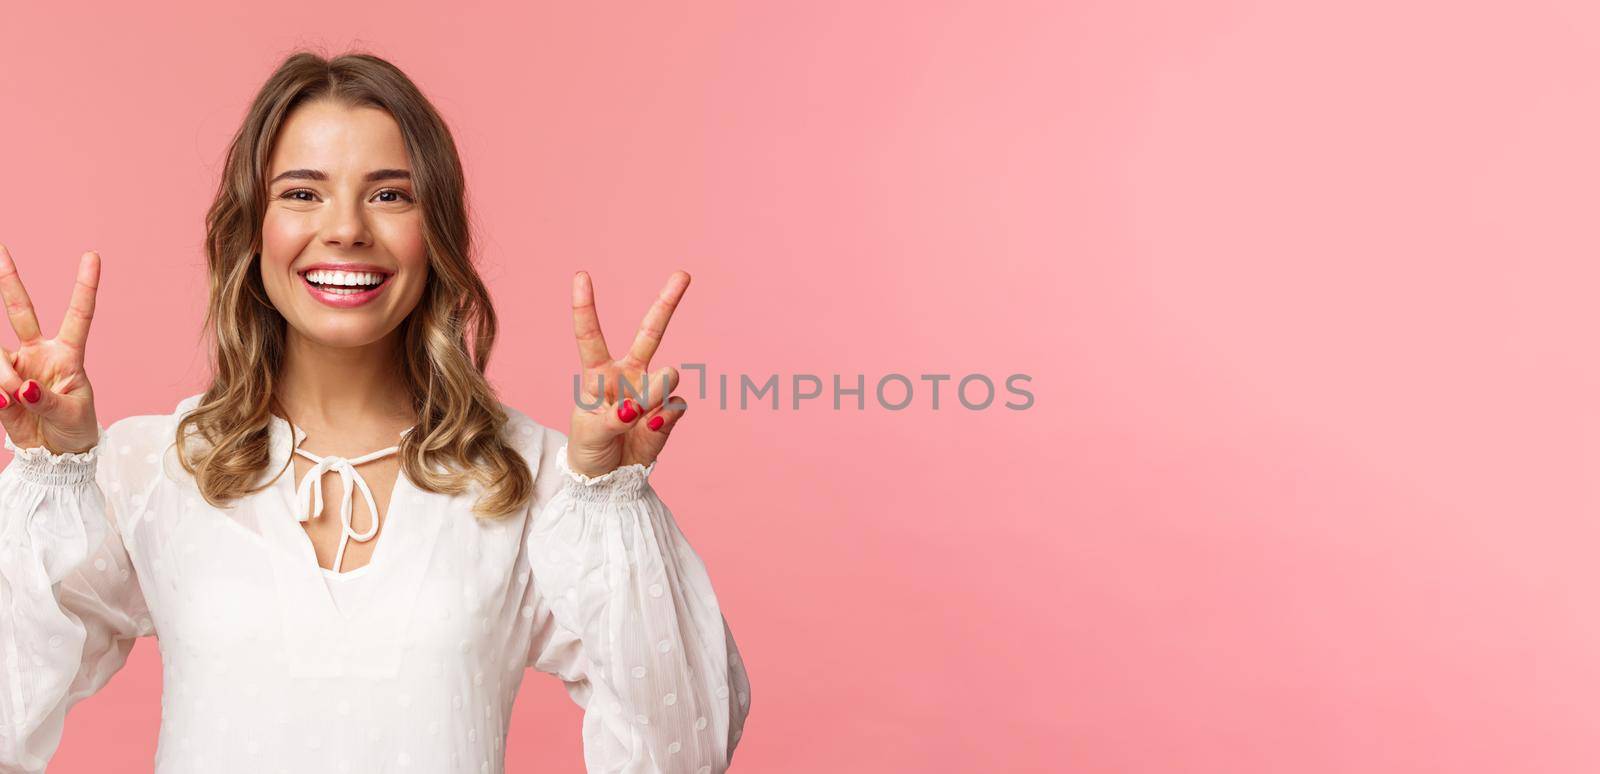 Close-up portrait of optimistic kawaii young blond girl with lovely beaming smile, showing peace signs and looking camera with positive attitude, enjoying spring, white dress, pink background.